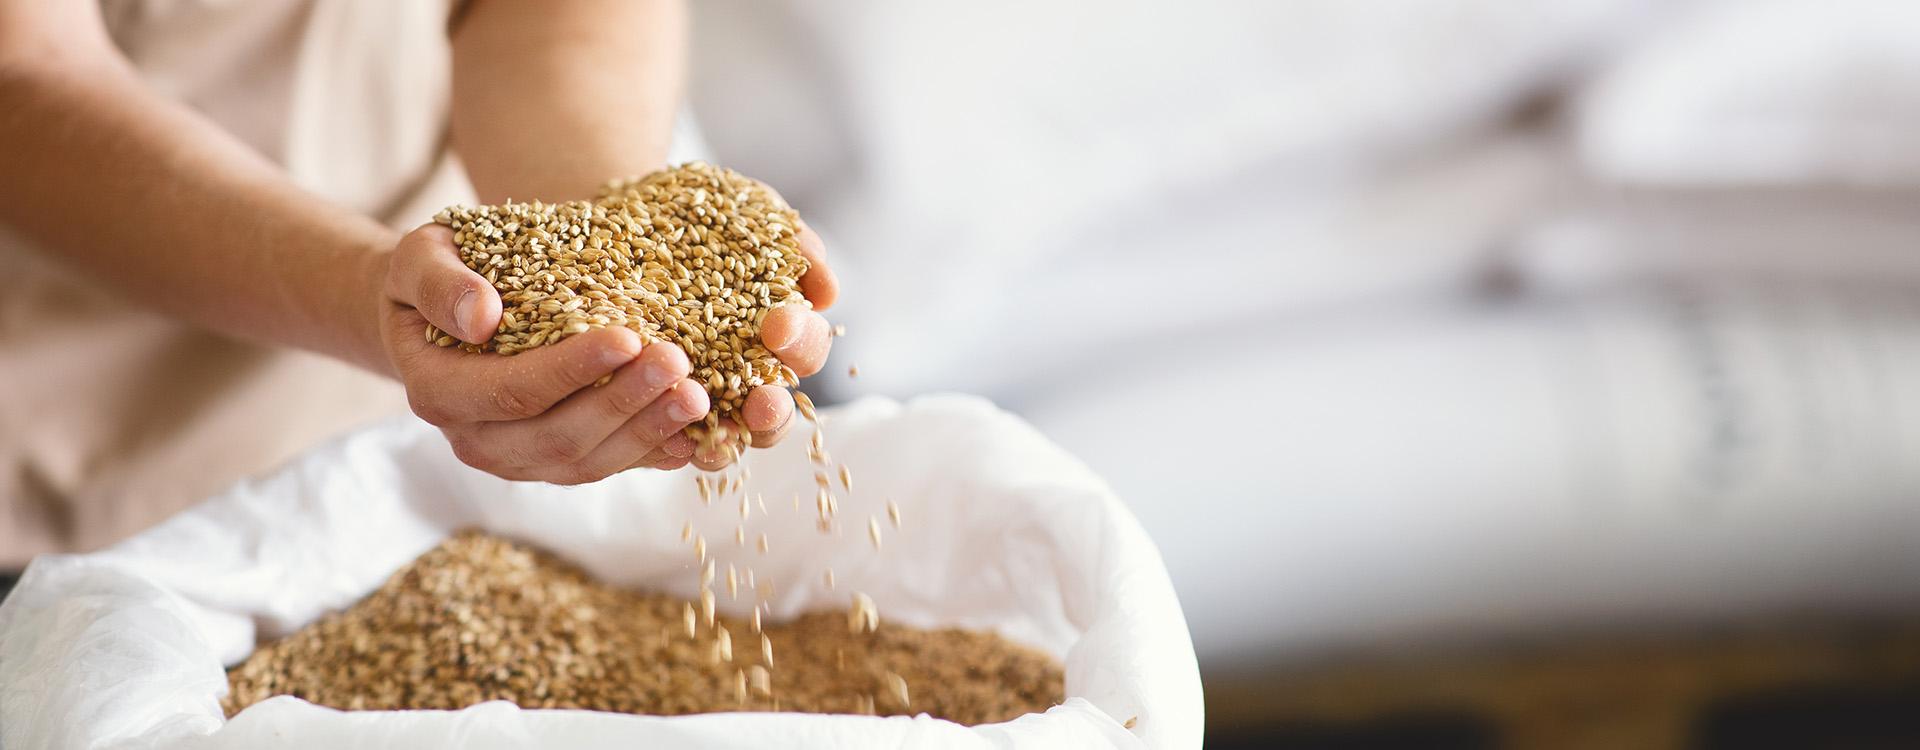 Hands holding quality brewing grains